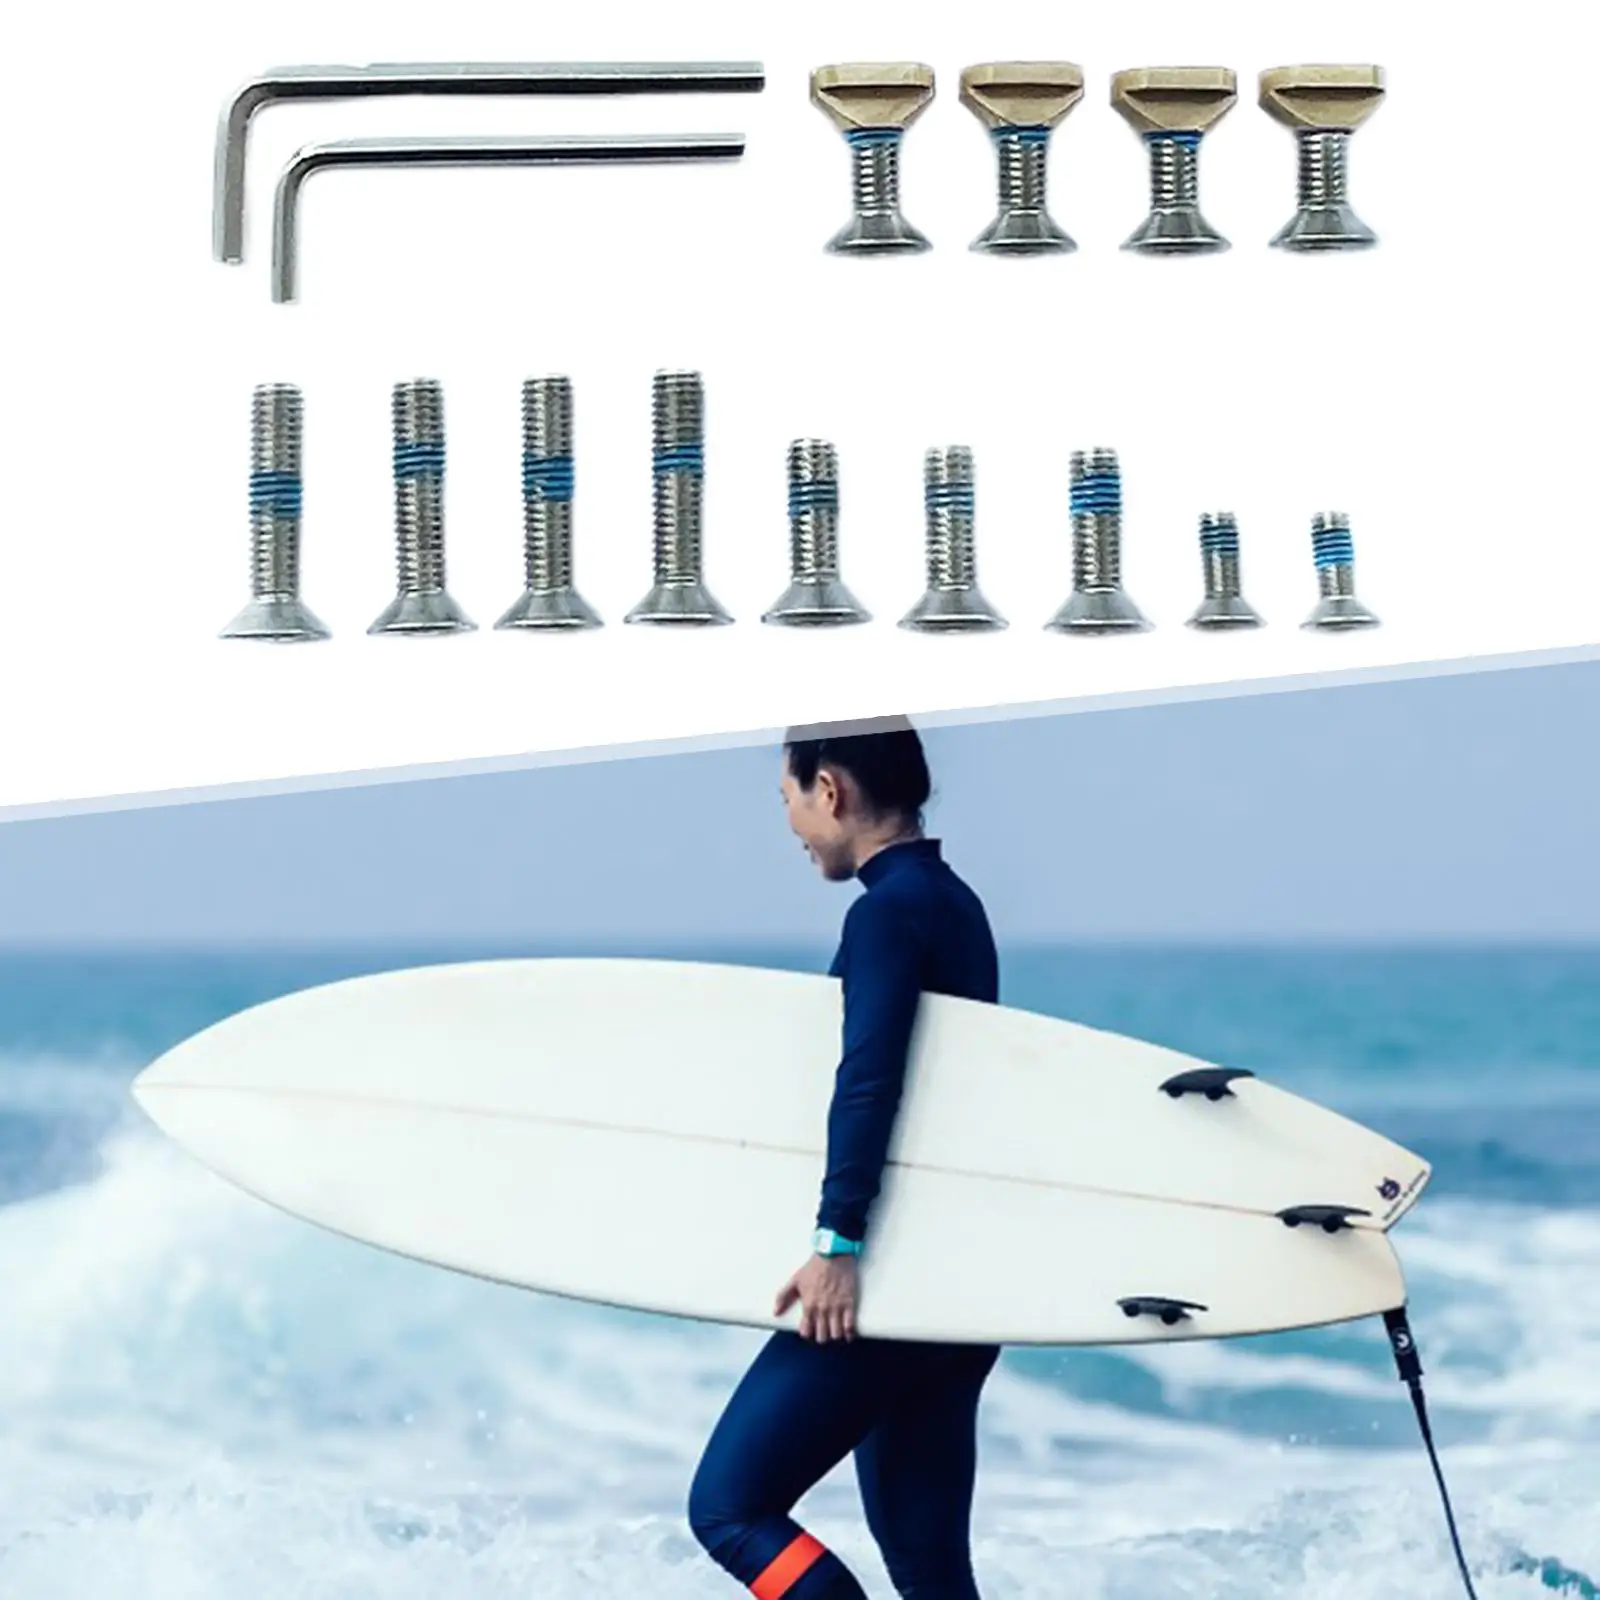 Surfboard Fin Screws High Quality Easy Installation Replace Stainless Steel for Surf Longboard Paddle Board Stand Paddle